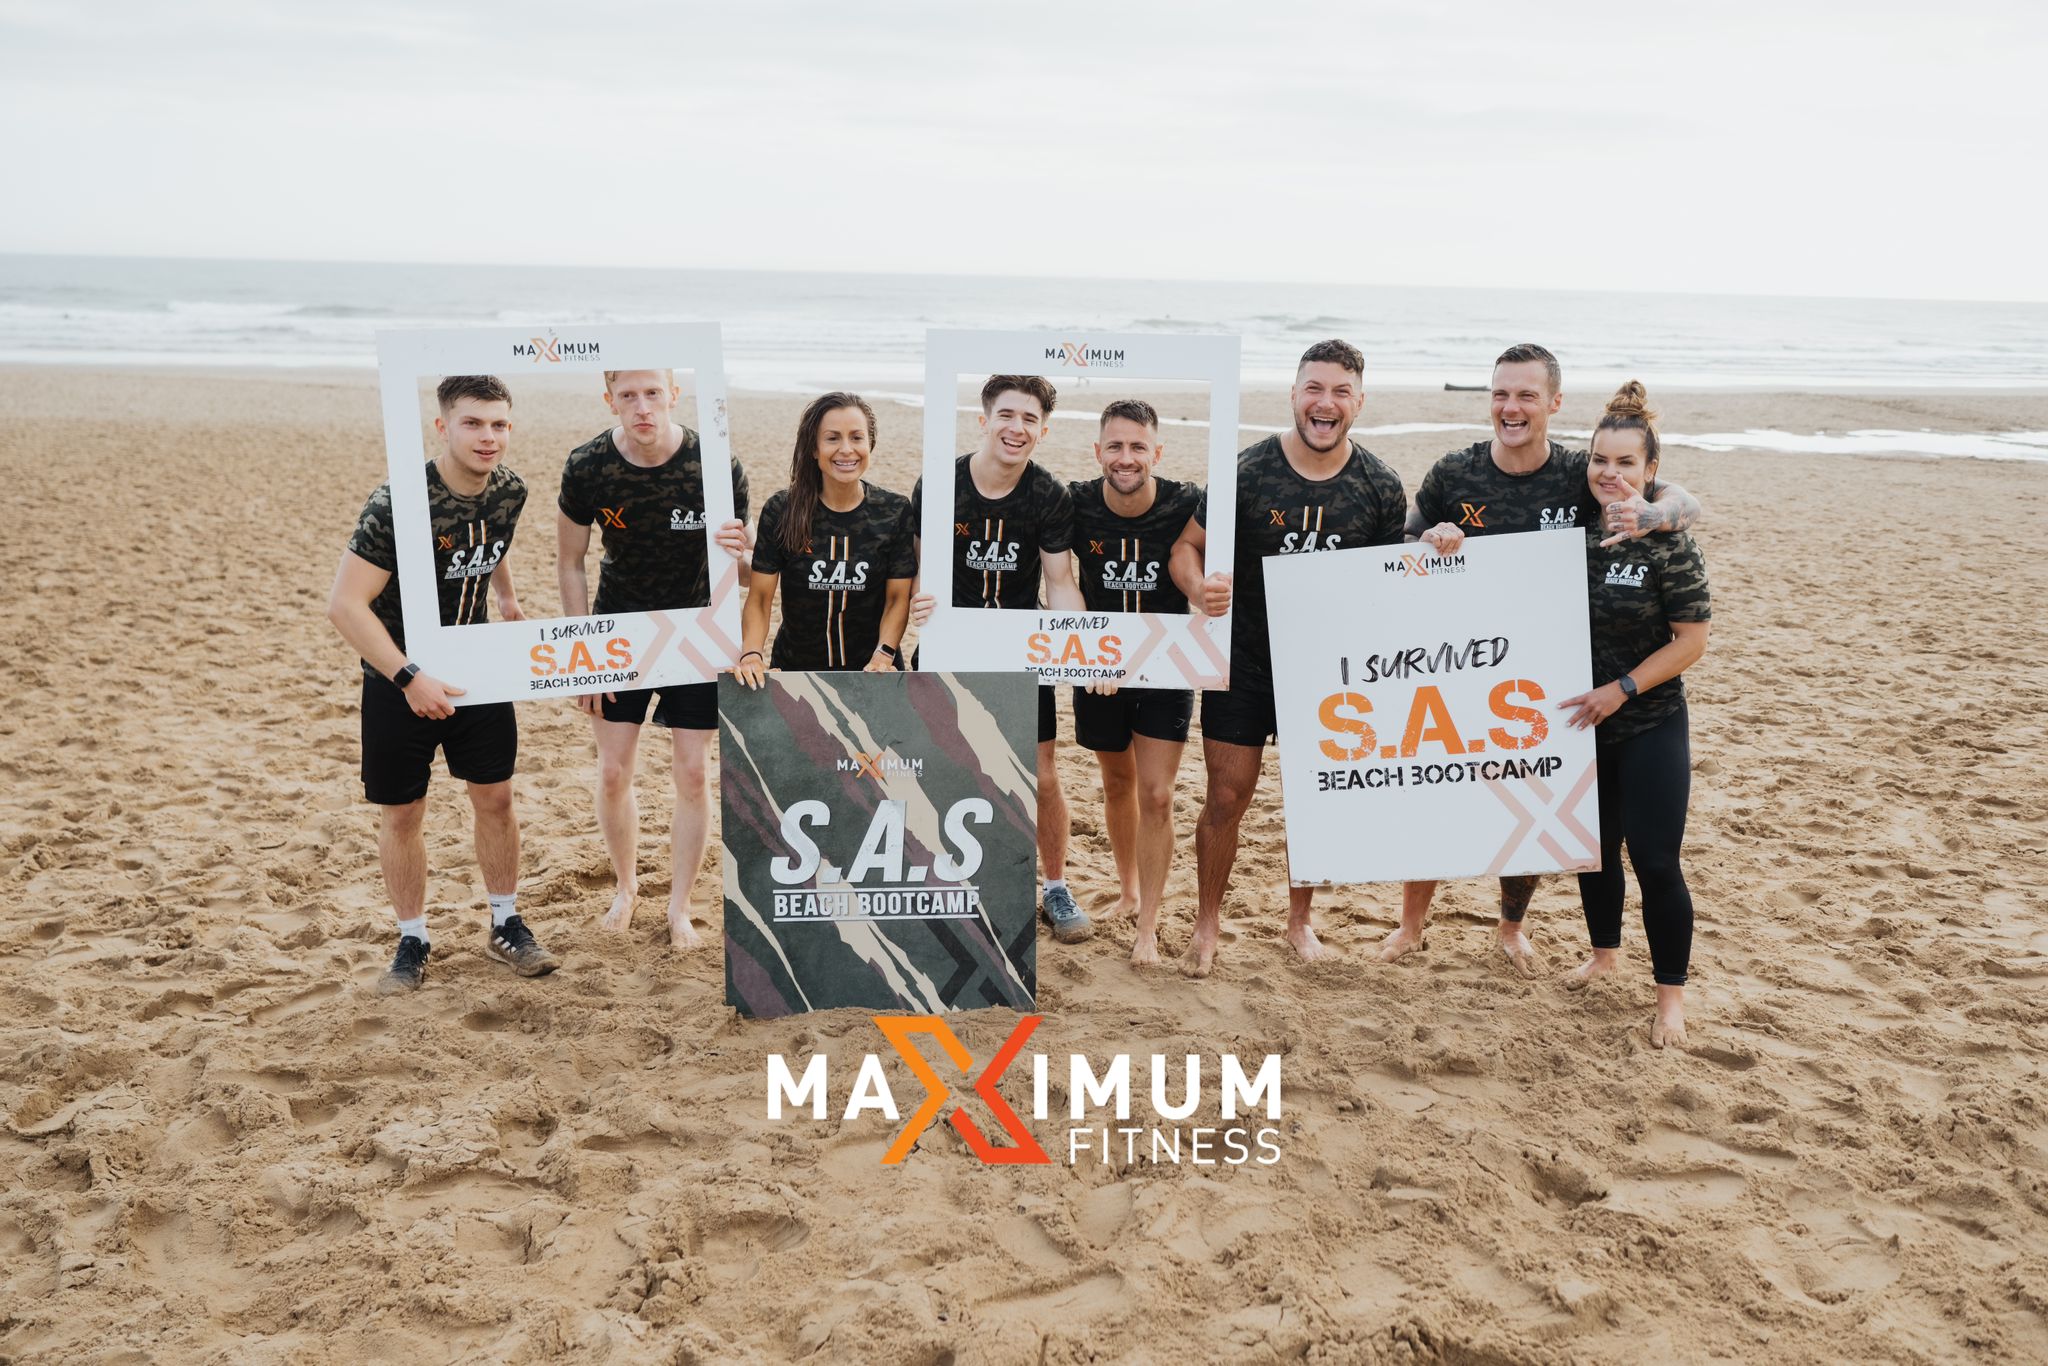 Participants at Maximum Fitness S.A.S Charity Beach Bootcamp for Feeding Families.